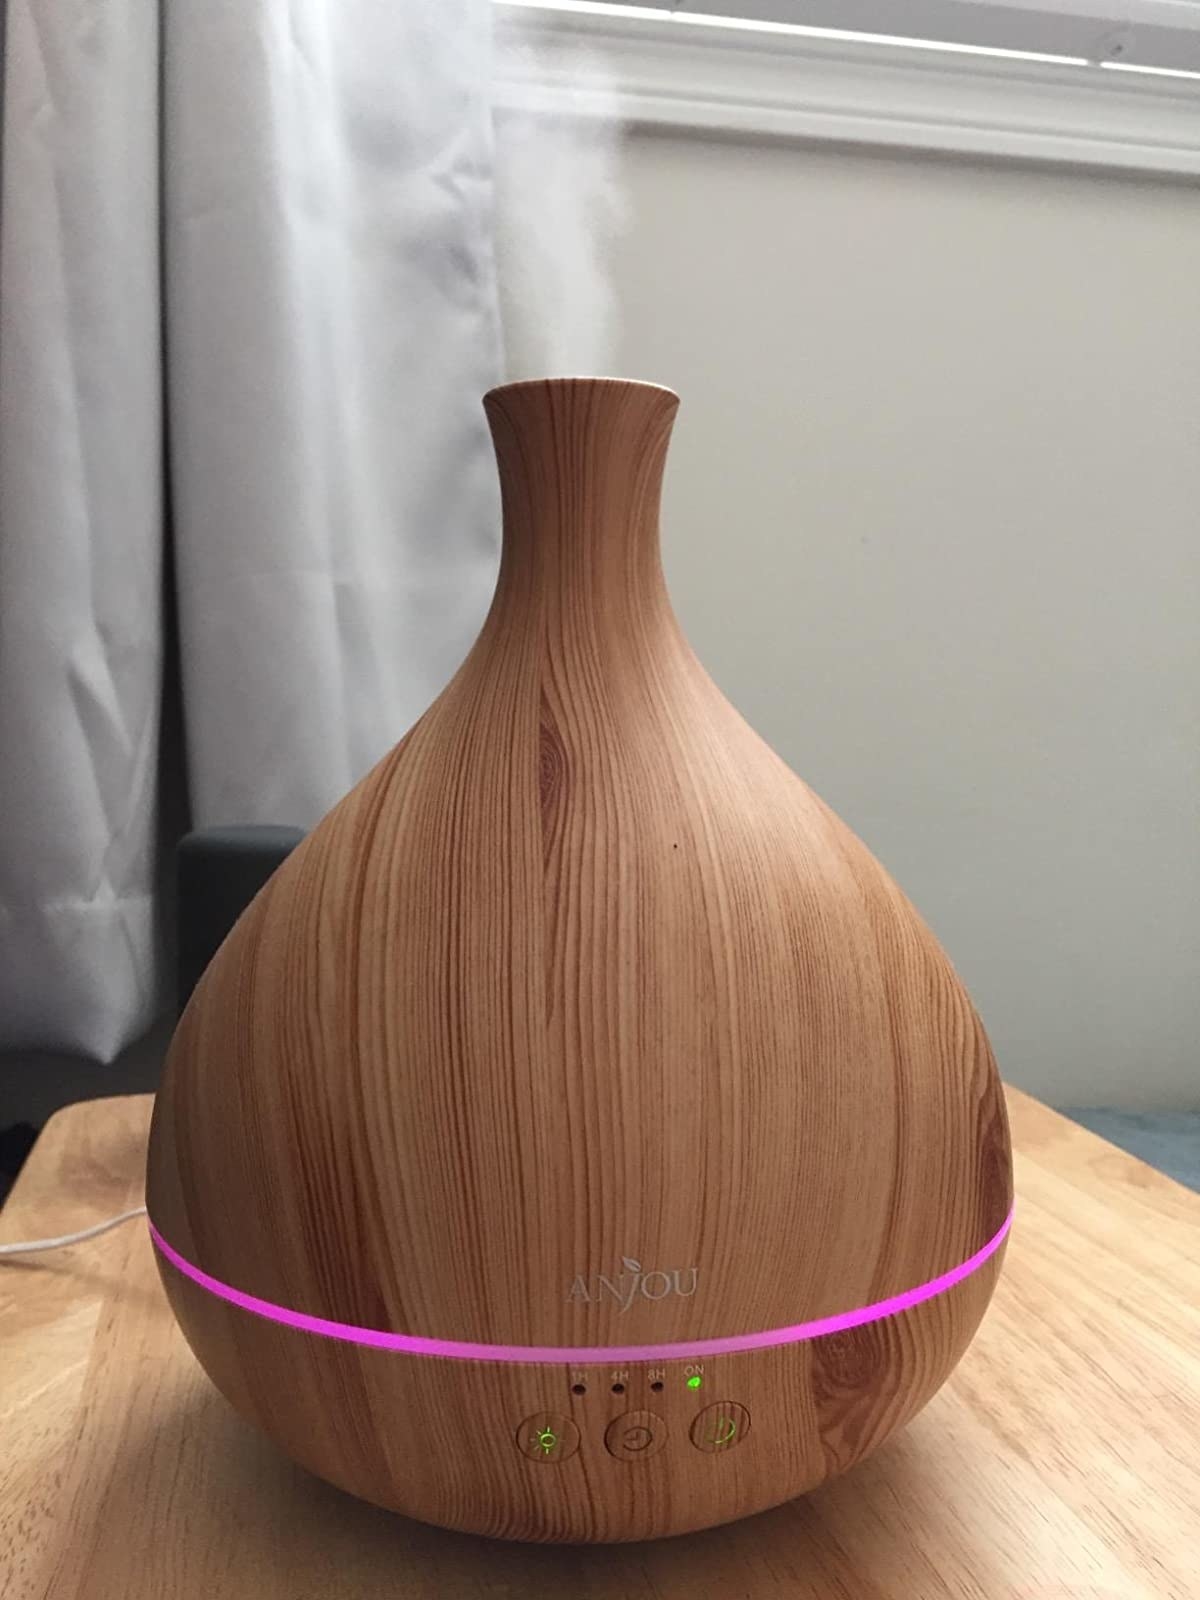 The vase-shaped diffuser